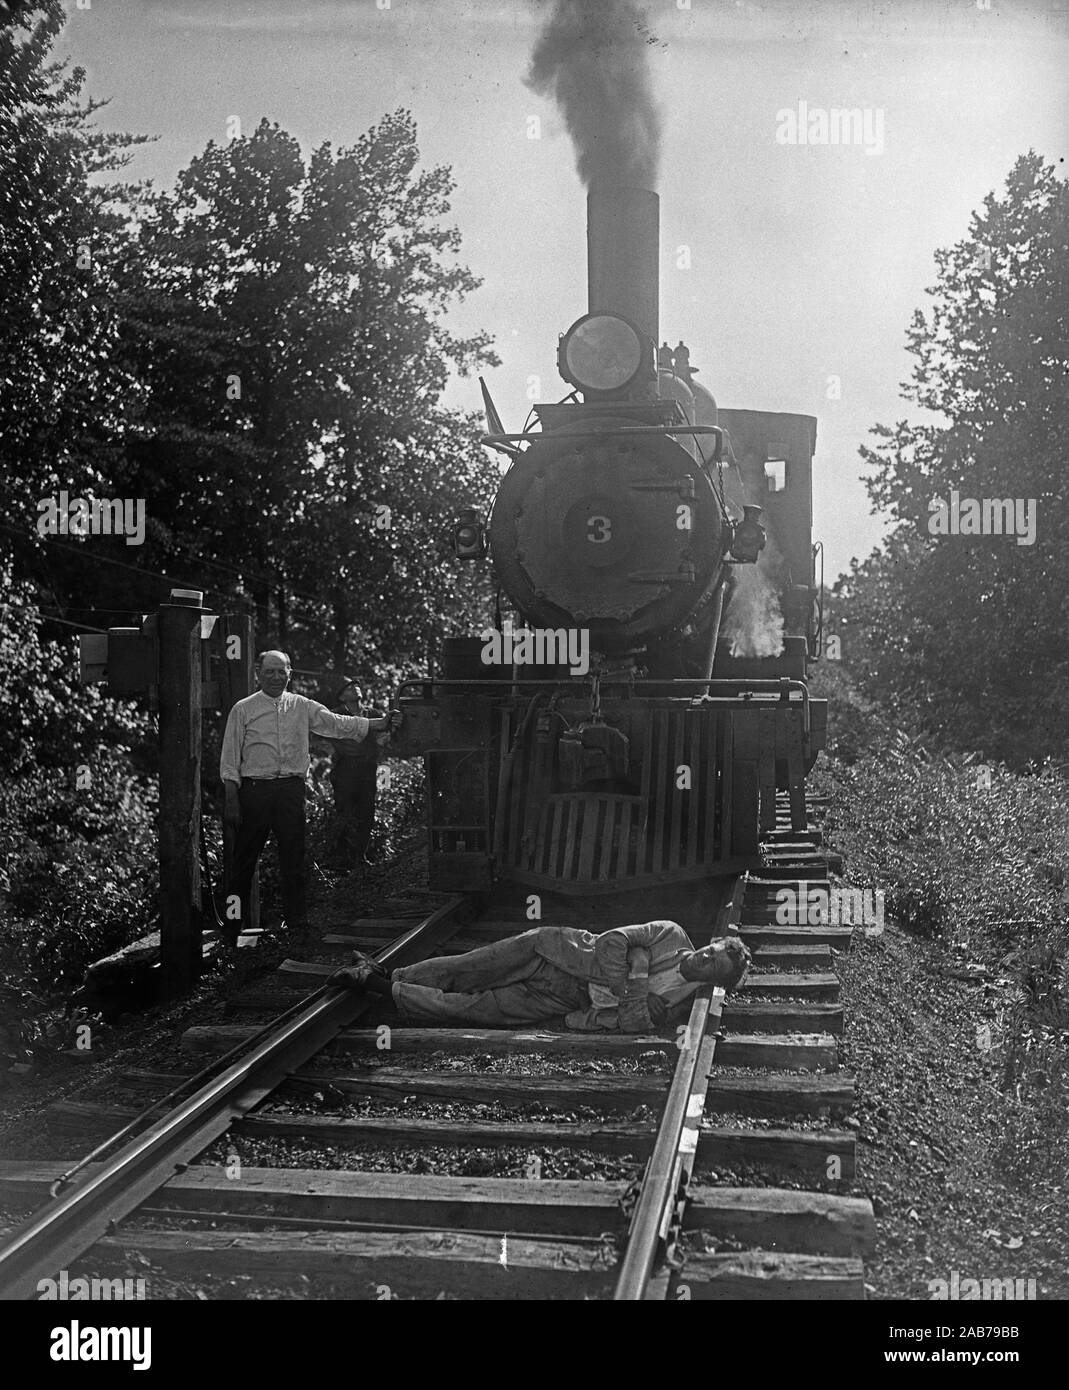 Man lying in front of train on tracks ca. June or July 1926 Stock Photo